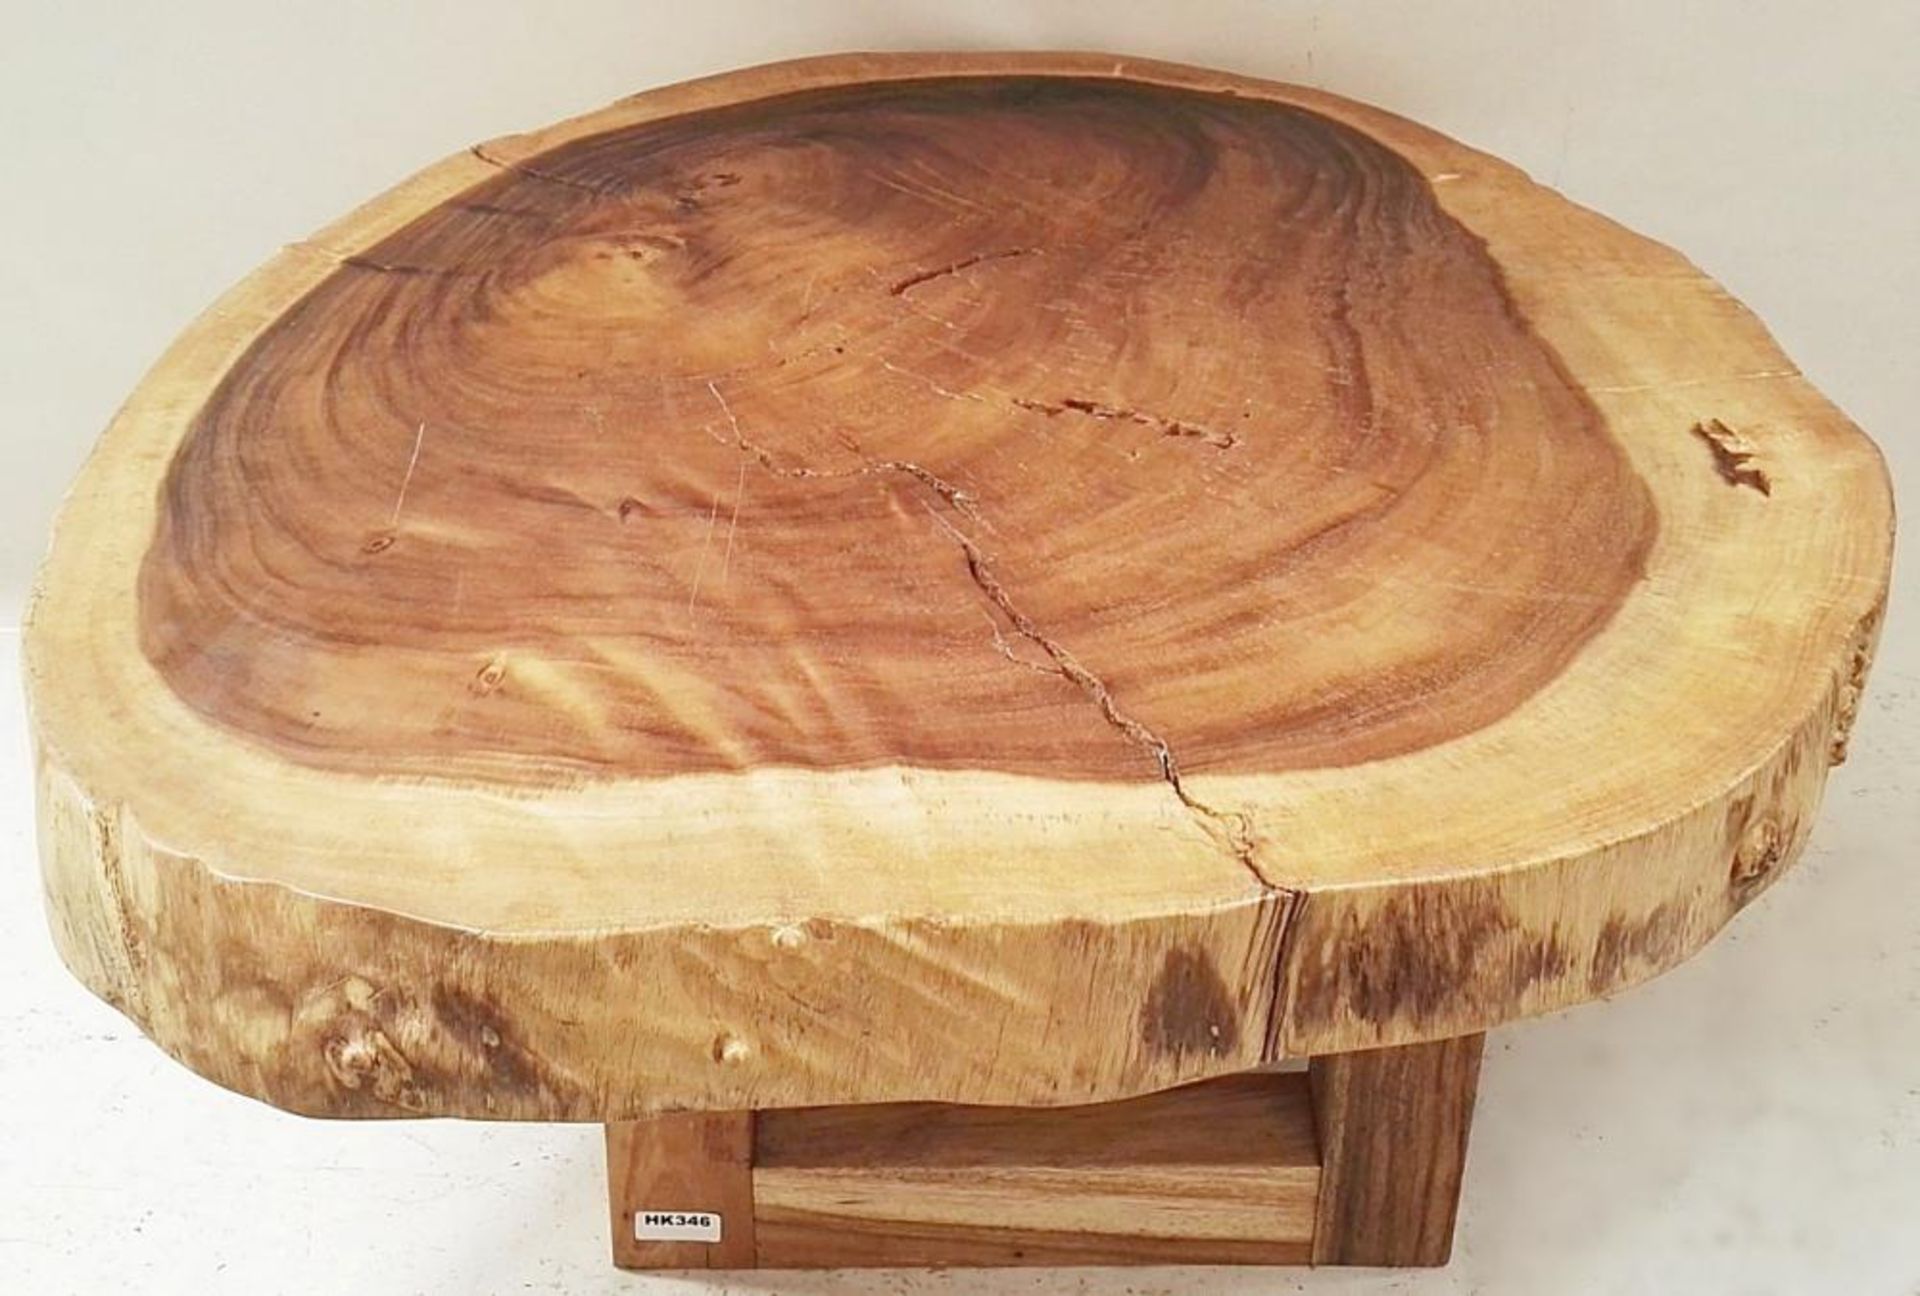 1 x Unique Reclaimed Solid Tree Trunk Coffee Table With Square Base - Dimensions (approx): Diameter - Image 2 of 6